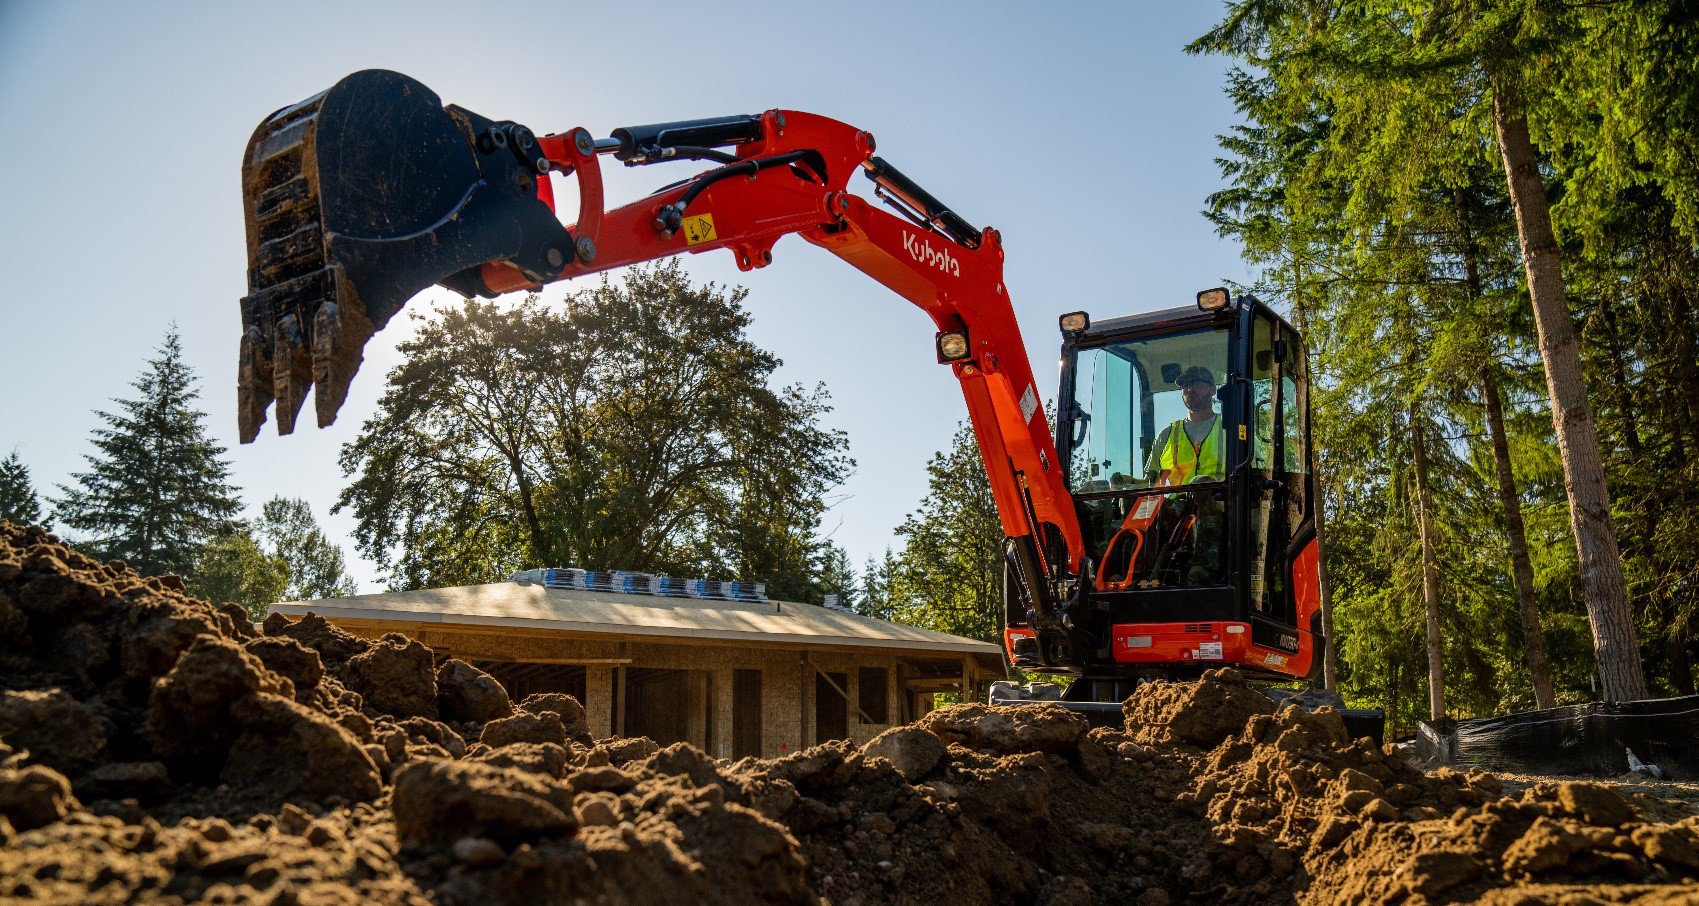 Tractor Loader Backhoe vs. Compact Excavator: Choosing the Right Equipment for the Job